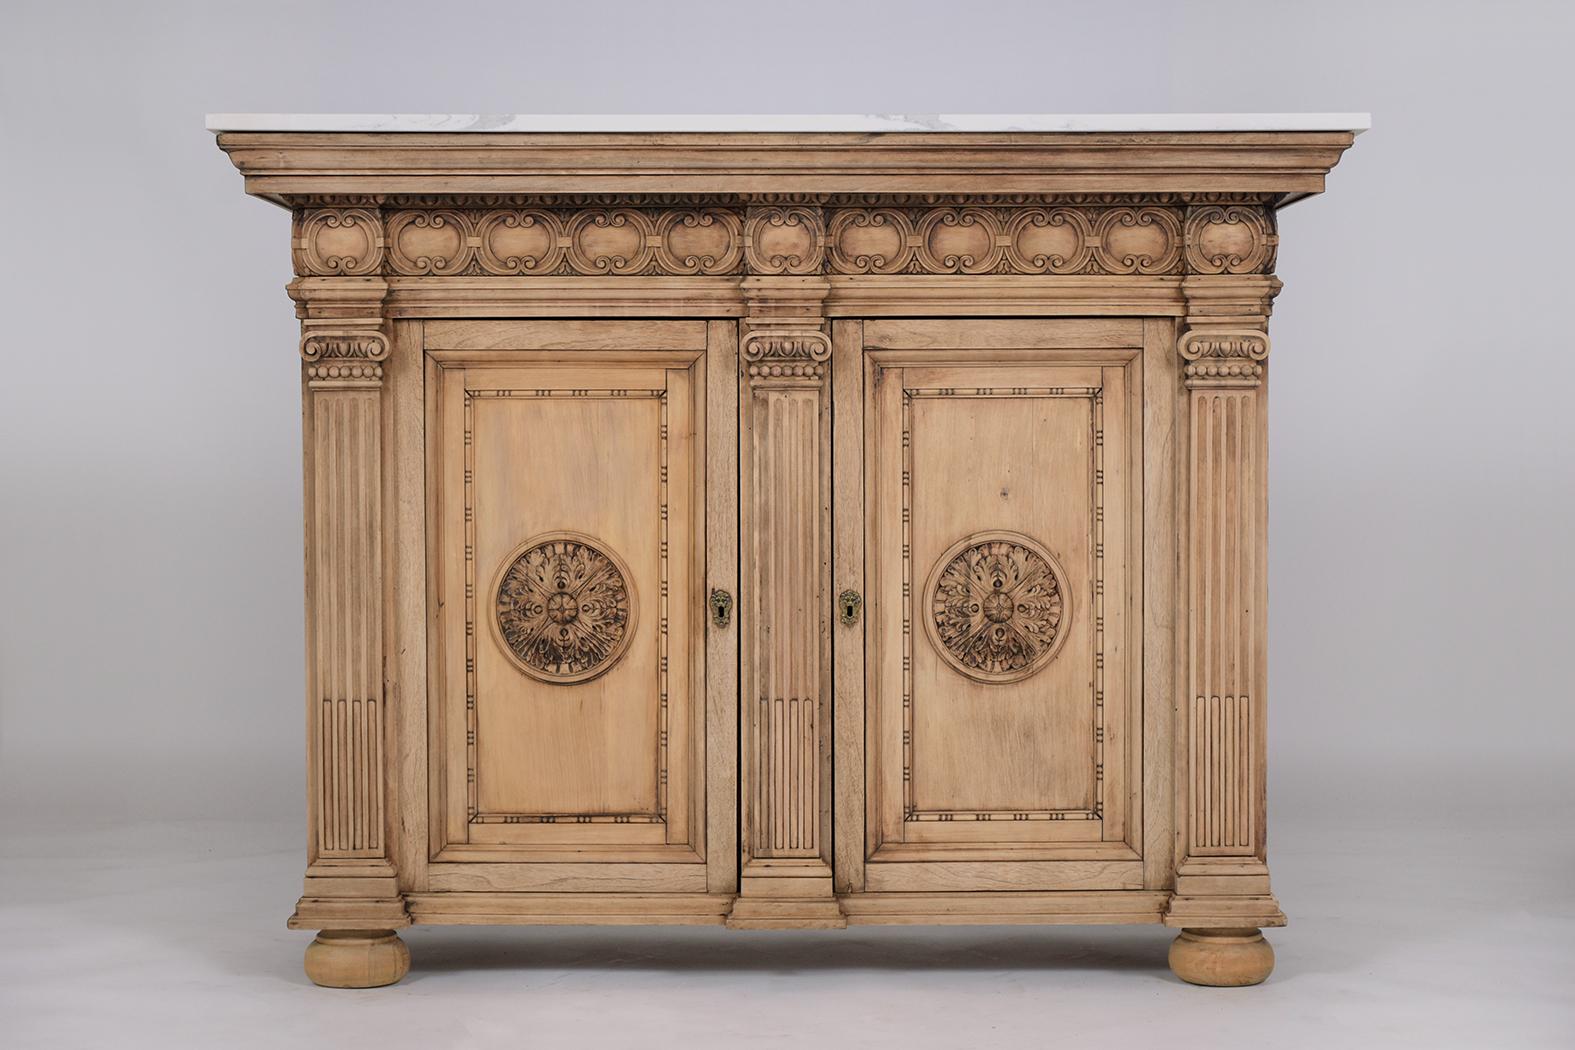 An extraordinary antique baroque cabinet beautifully crafted out of walnut wood in great condition completed restored by our craftsmen team. This server features a unique bleached wood finish, rectangular marble top, two framed panel doors with